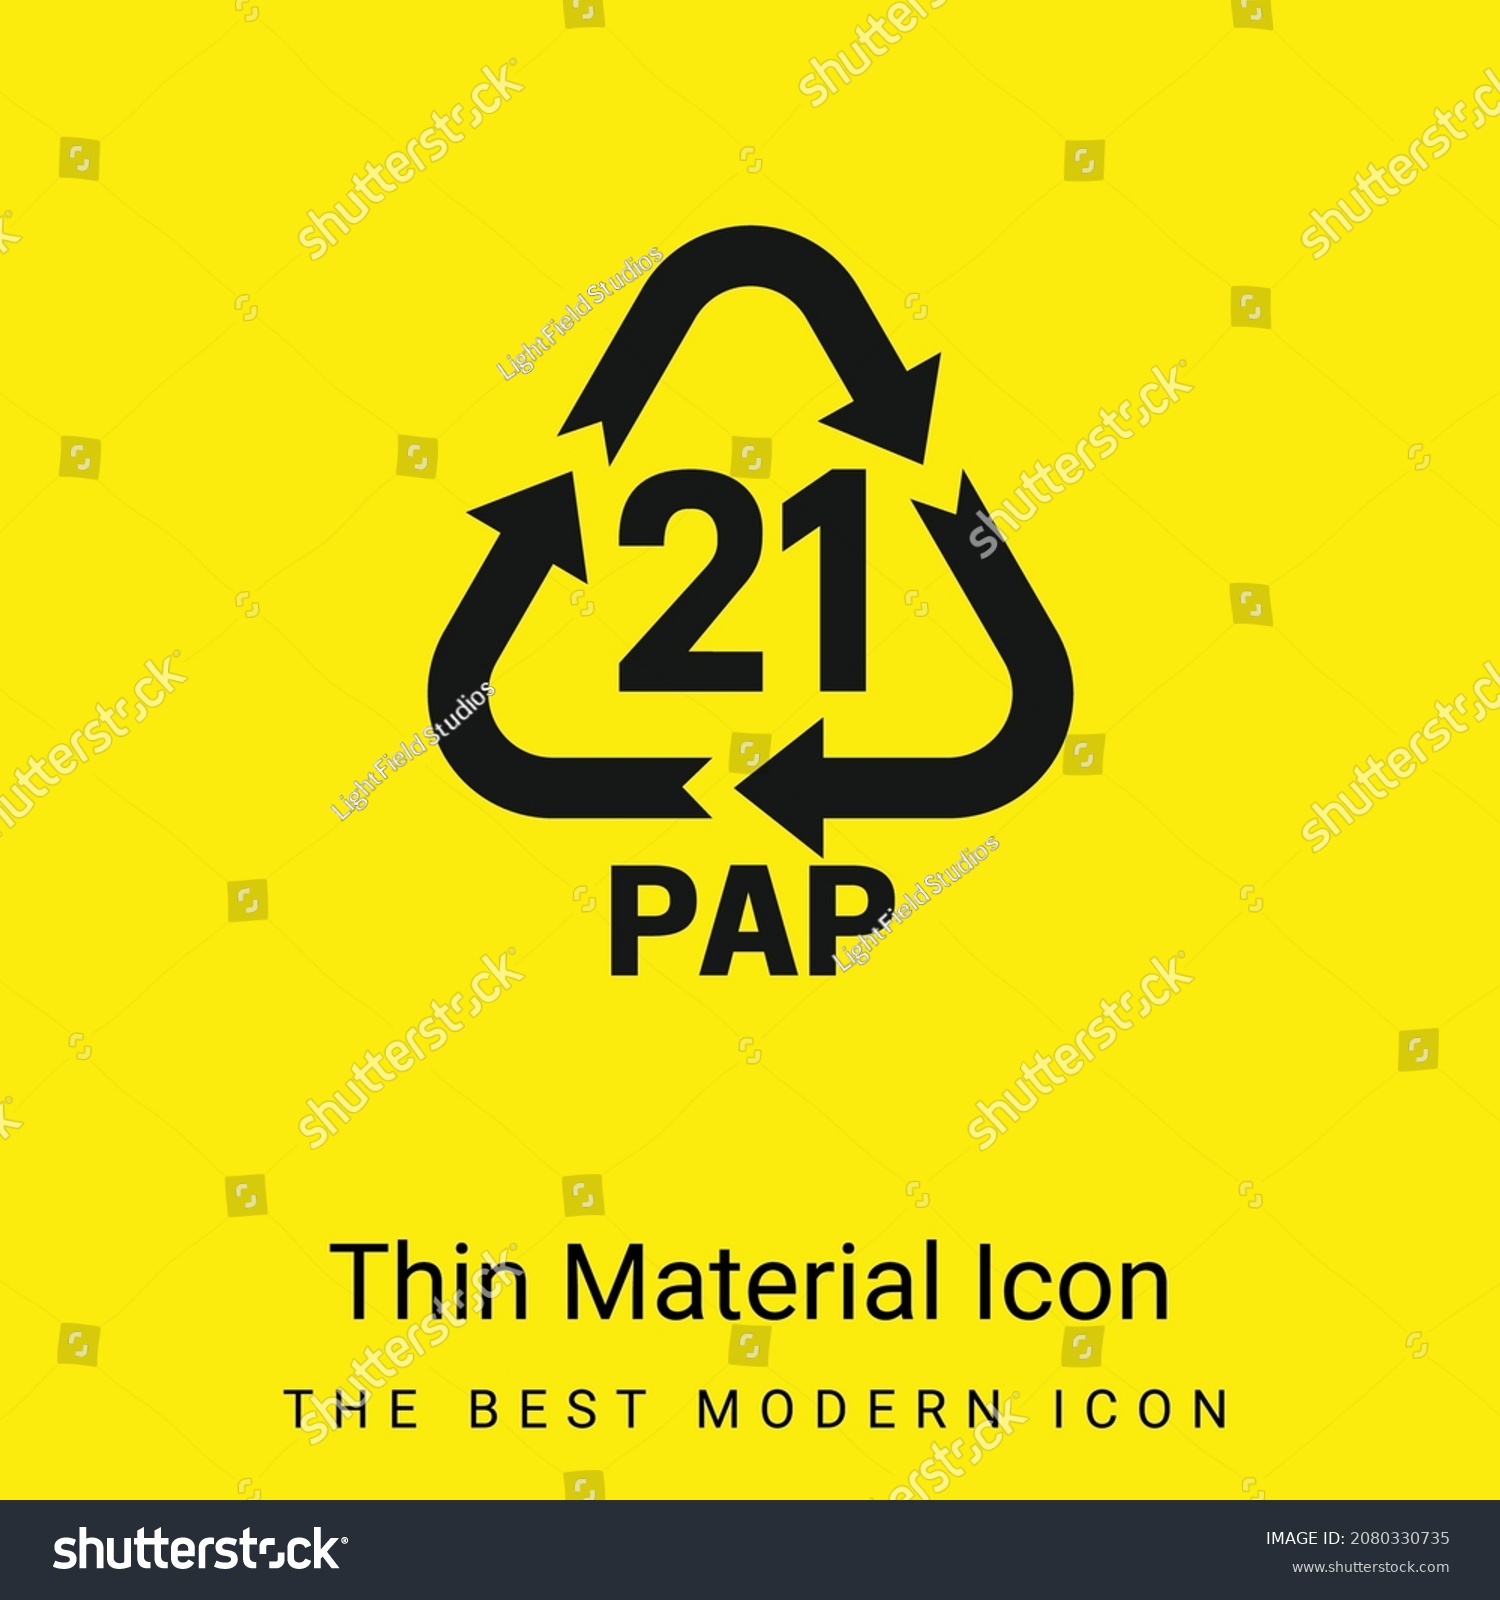 SVG of 21 PAP minimal bright yellow material icon svg